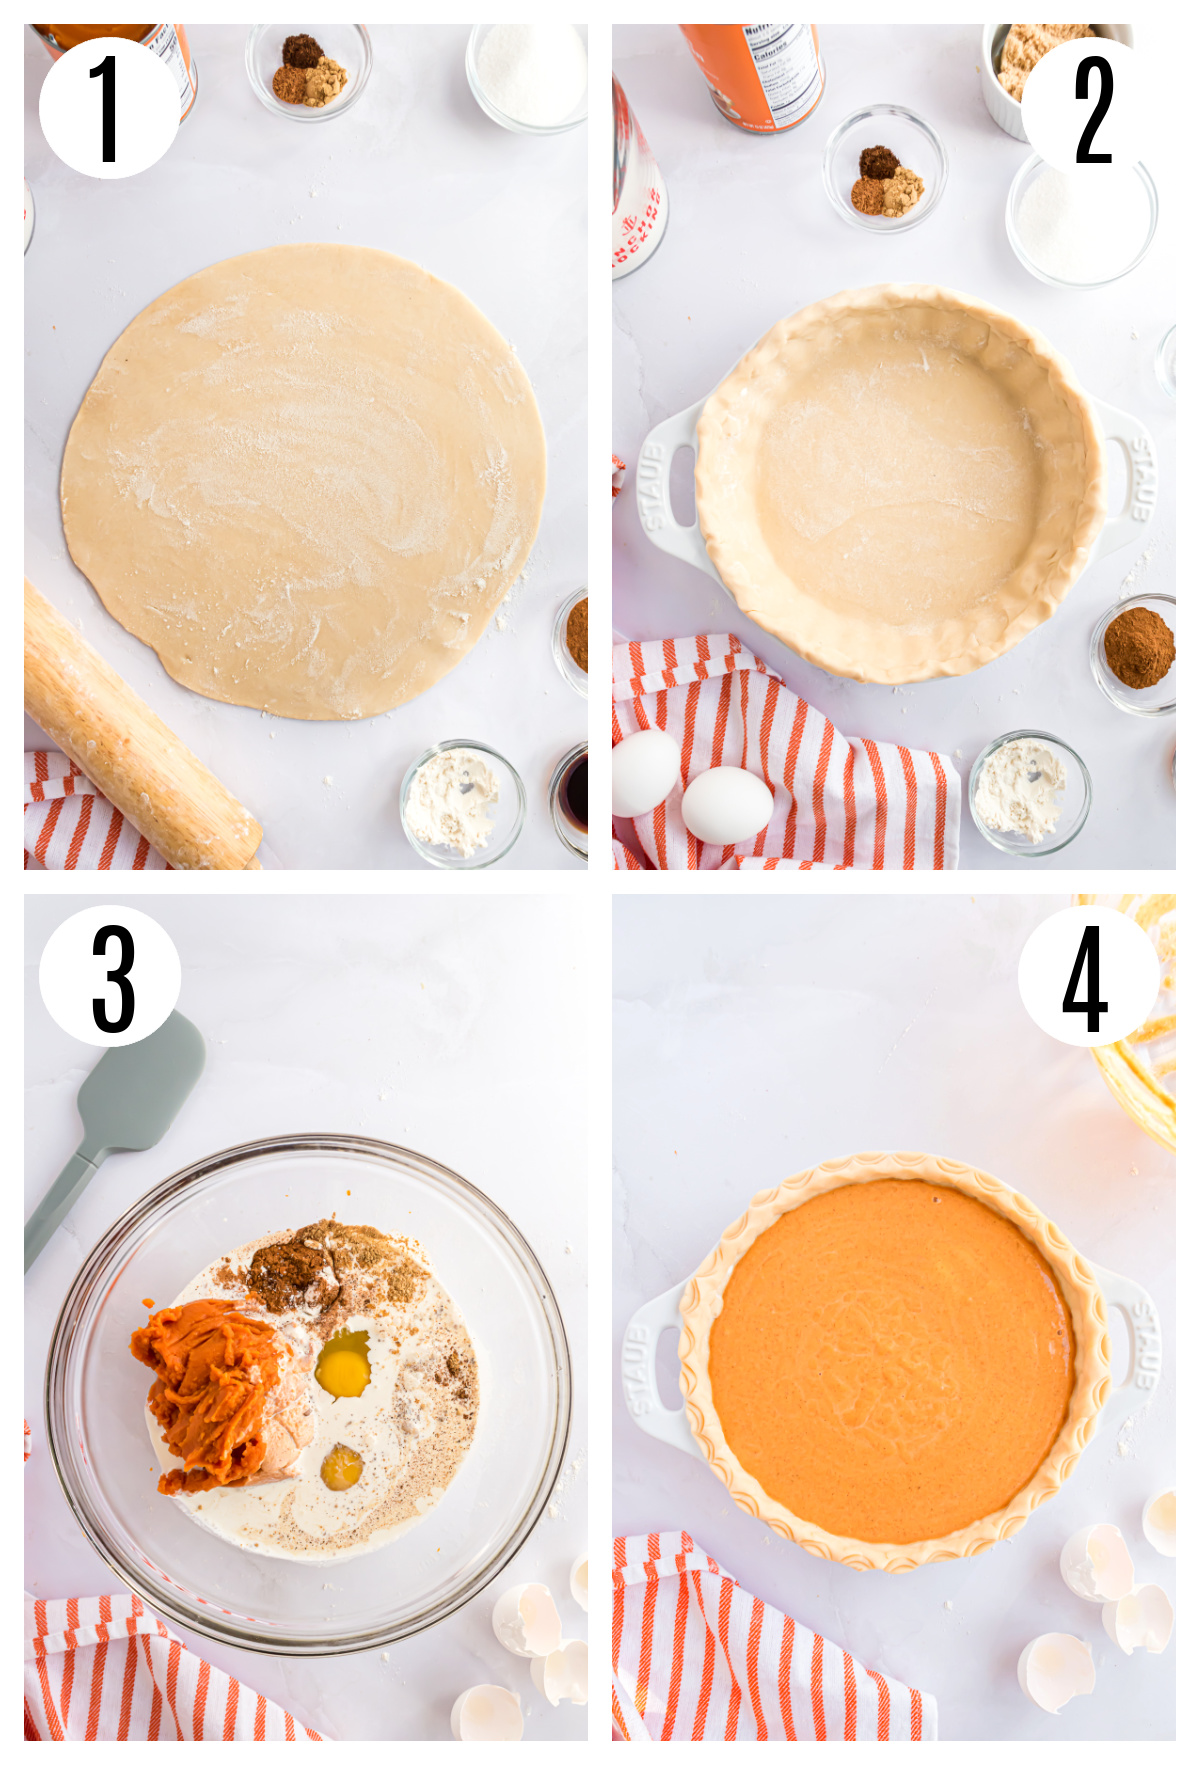 The steps to make the Pumpkin Pie without evaporated milk include: rolling the pie crust, pressing the crust into a pie plate, stirring all the filling ingredients together and pouring the filling into the prepared pie crust.